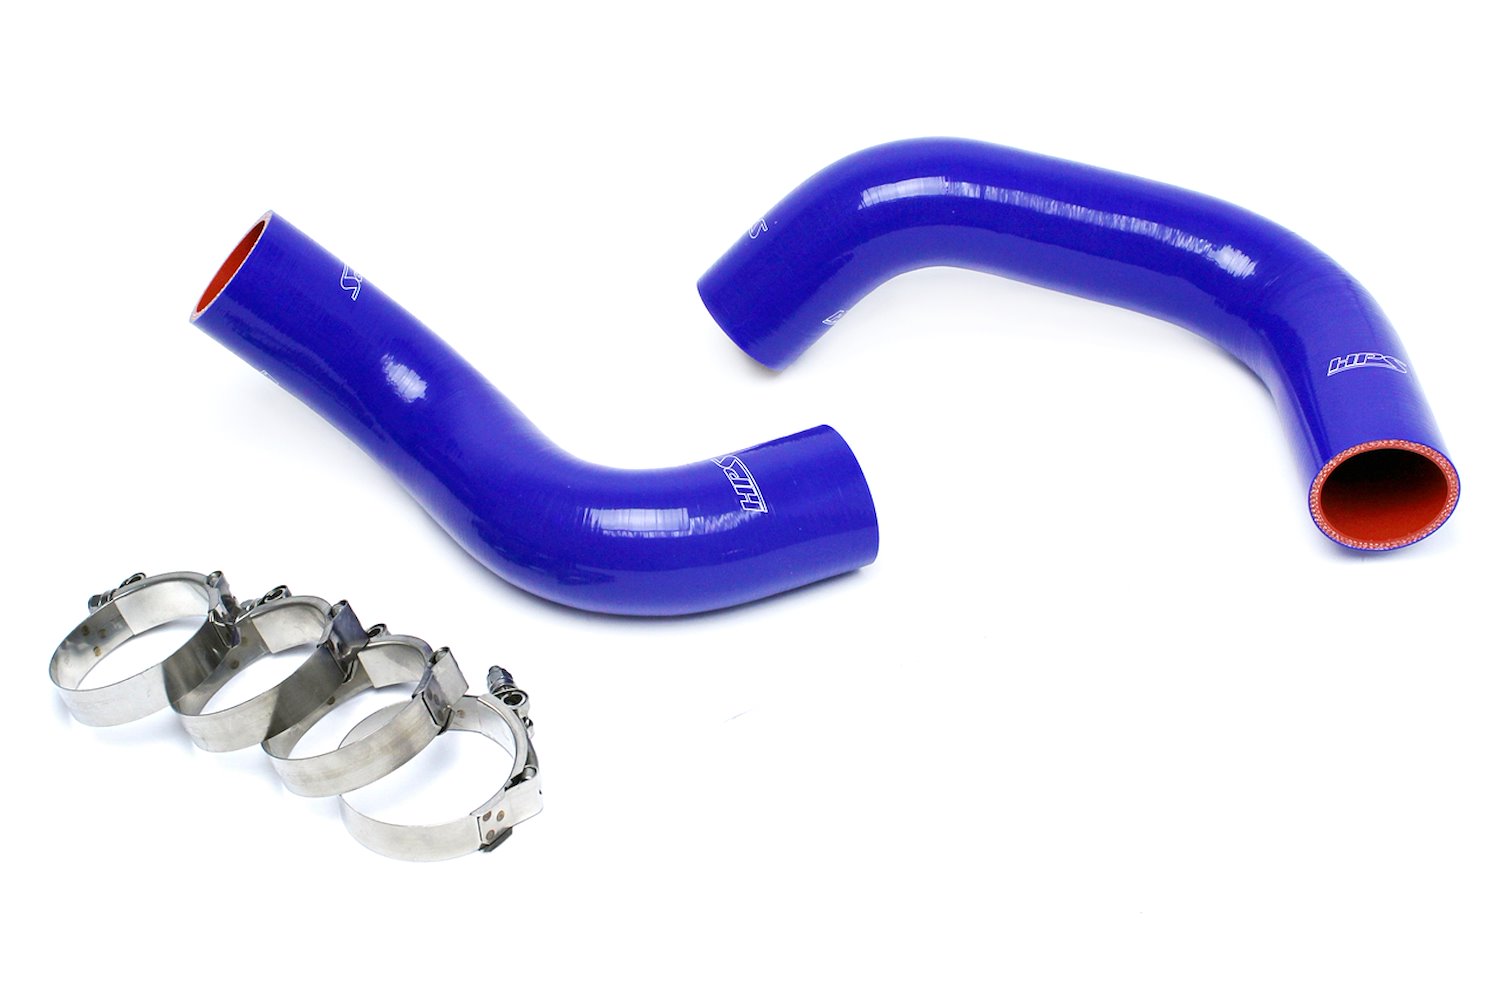 57-1498R-BLUE Radiator Hose Kit, High-Temp 3-Ply Reinforced Silicone, Replace OEM Rubber Radiator Coolant Hoses